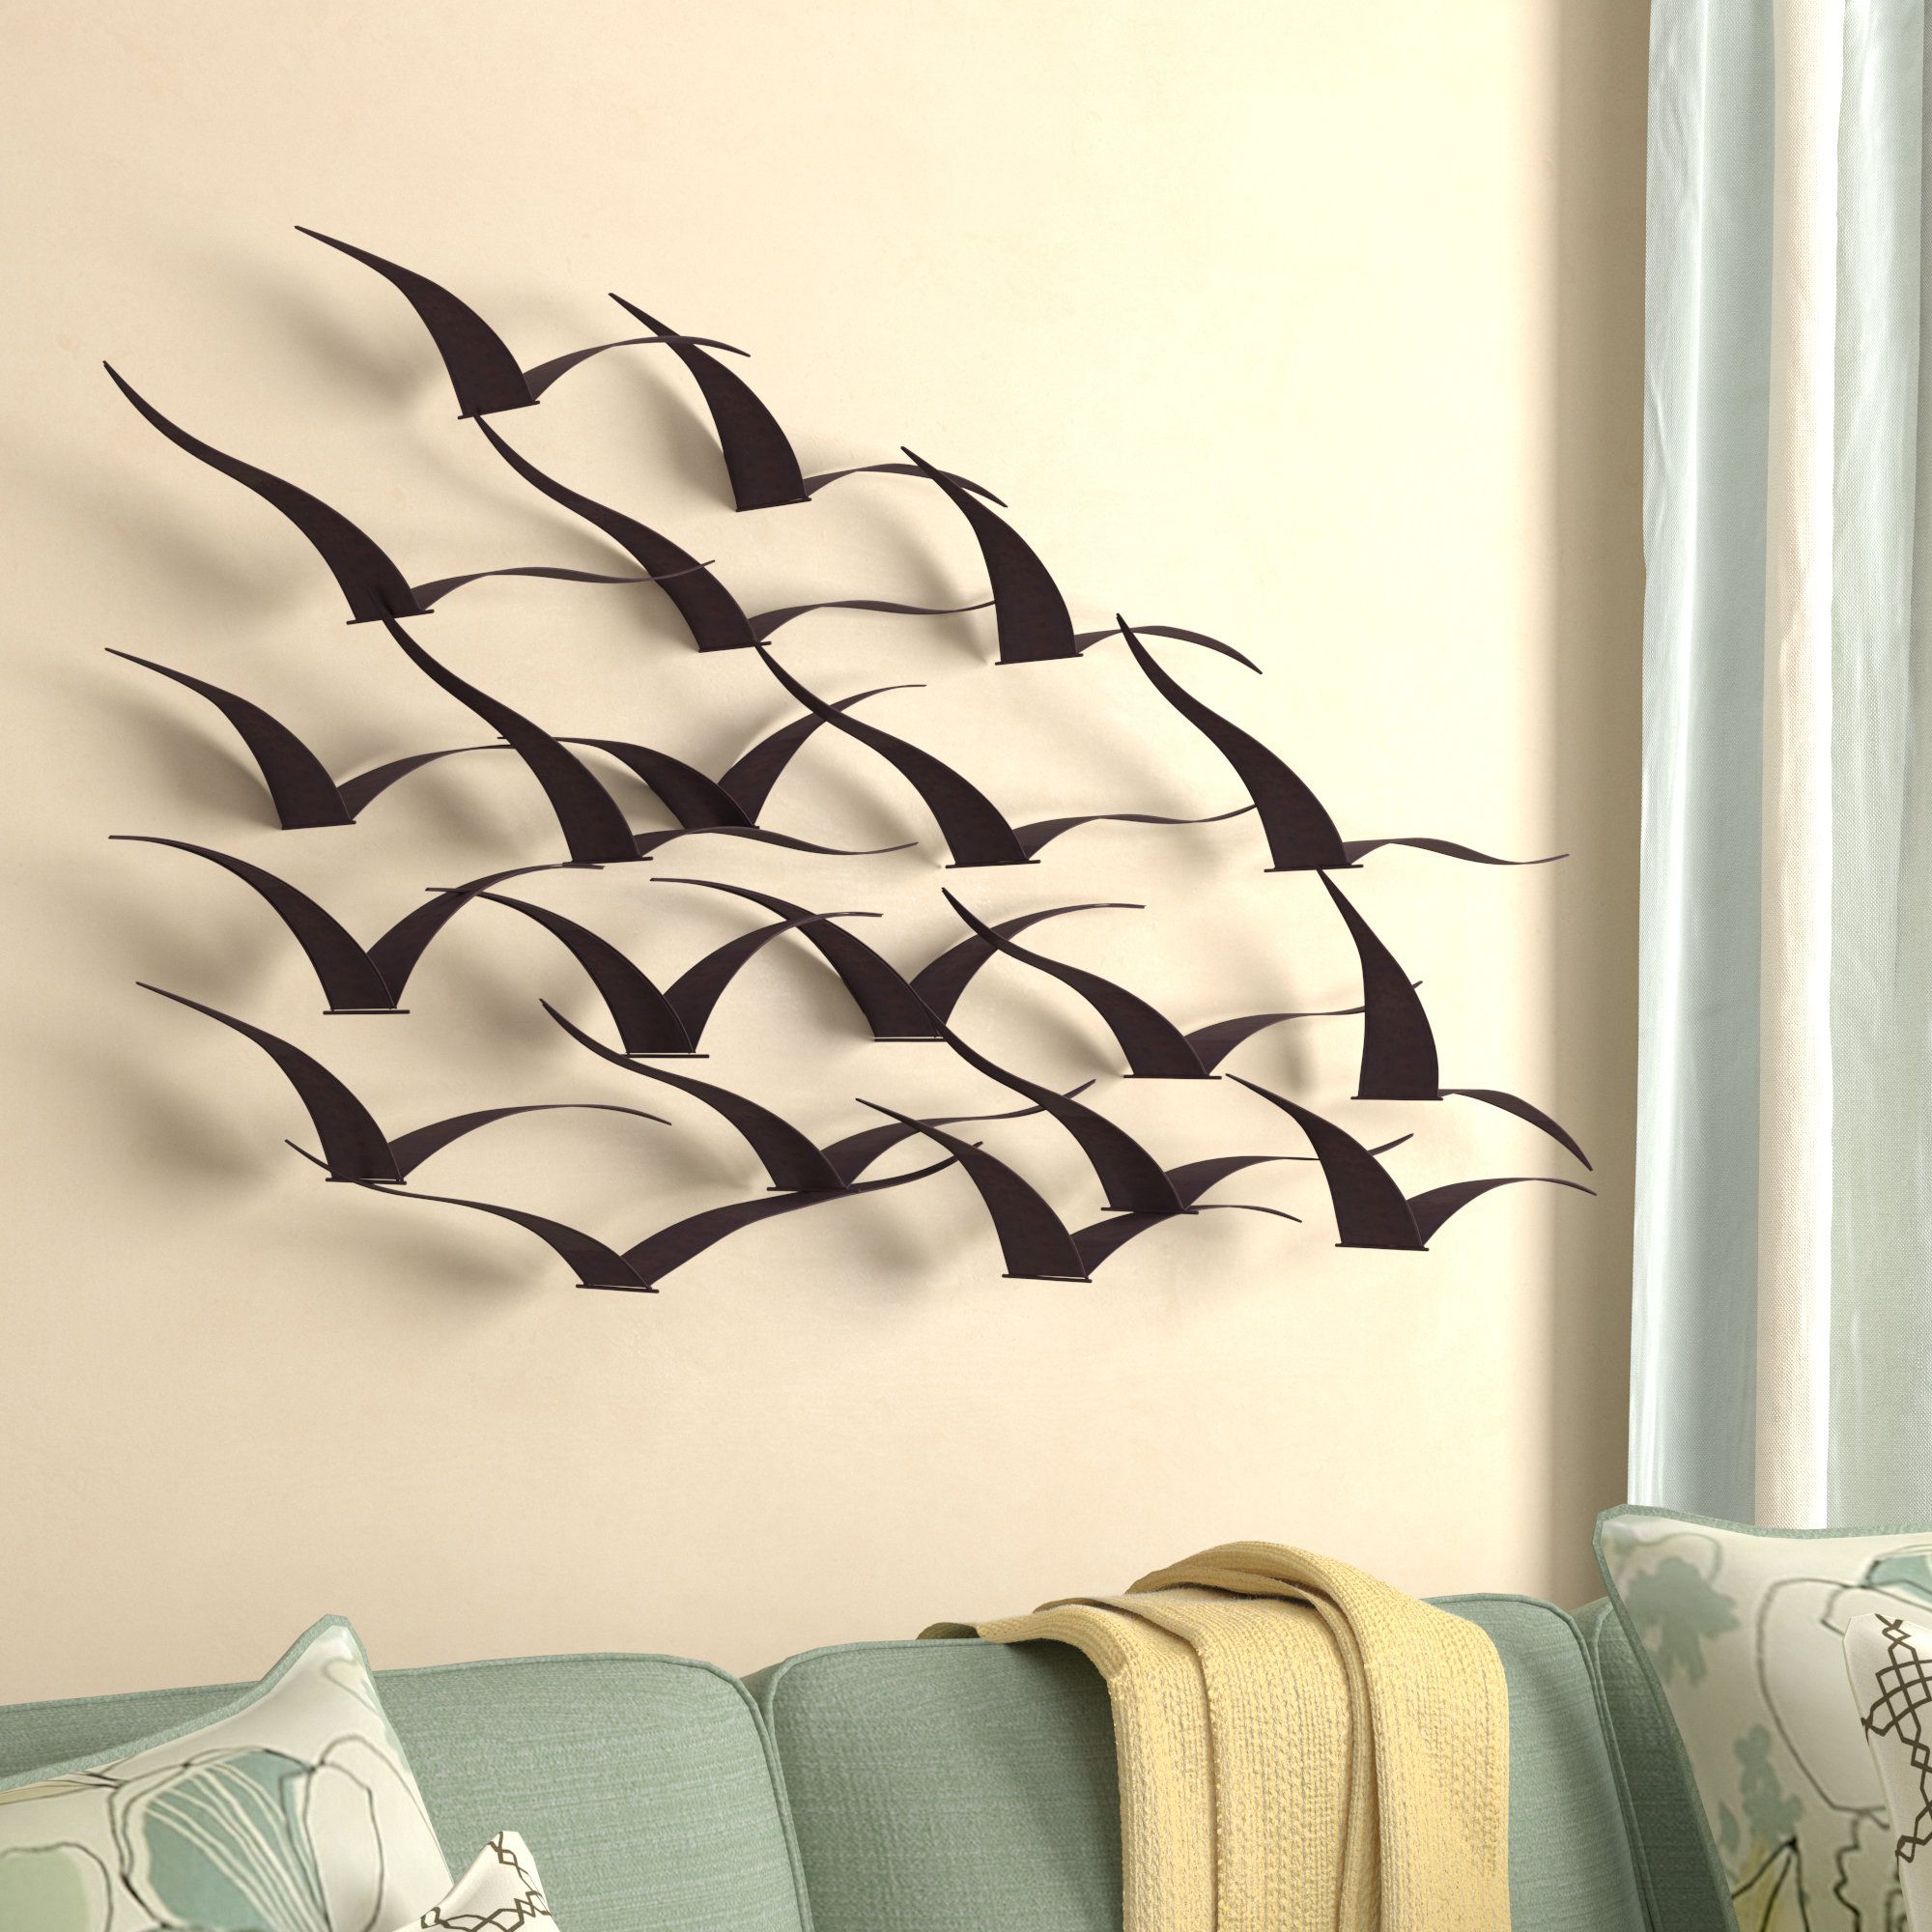 Metal Bird Wall Decor You'll Love In 2021 – Visualhunt Within 2018 Wooden Blocks Metal Wall Art (View 6 of 20)